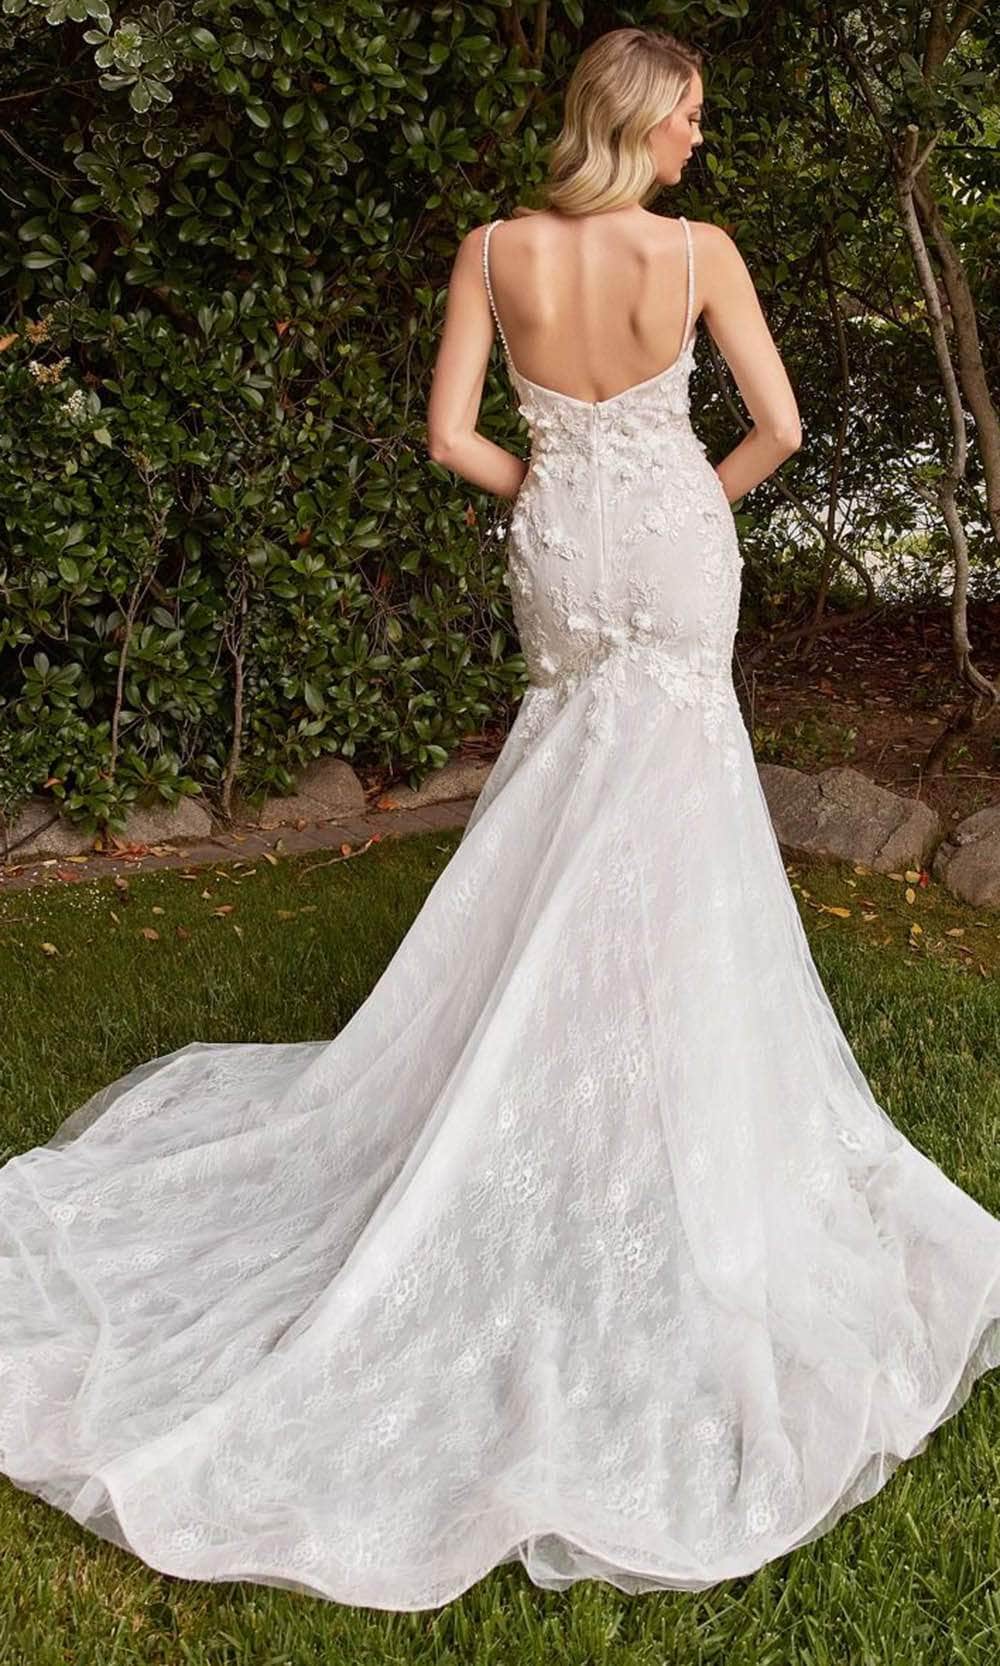 Ladivine CD856W - Layered Lace Gown